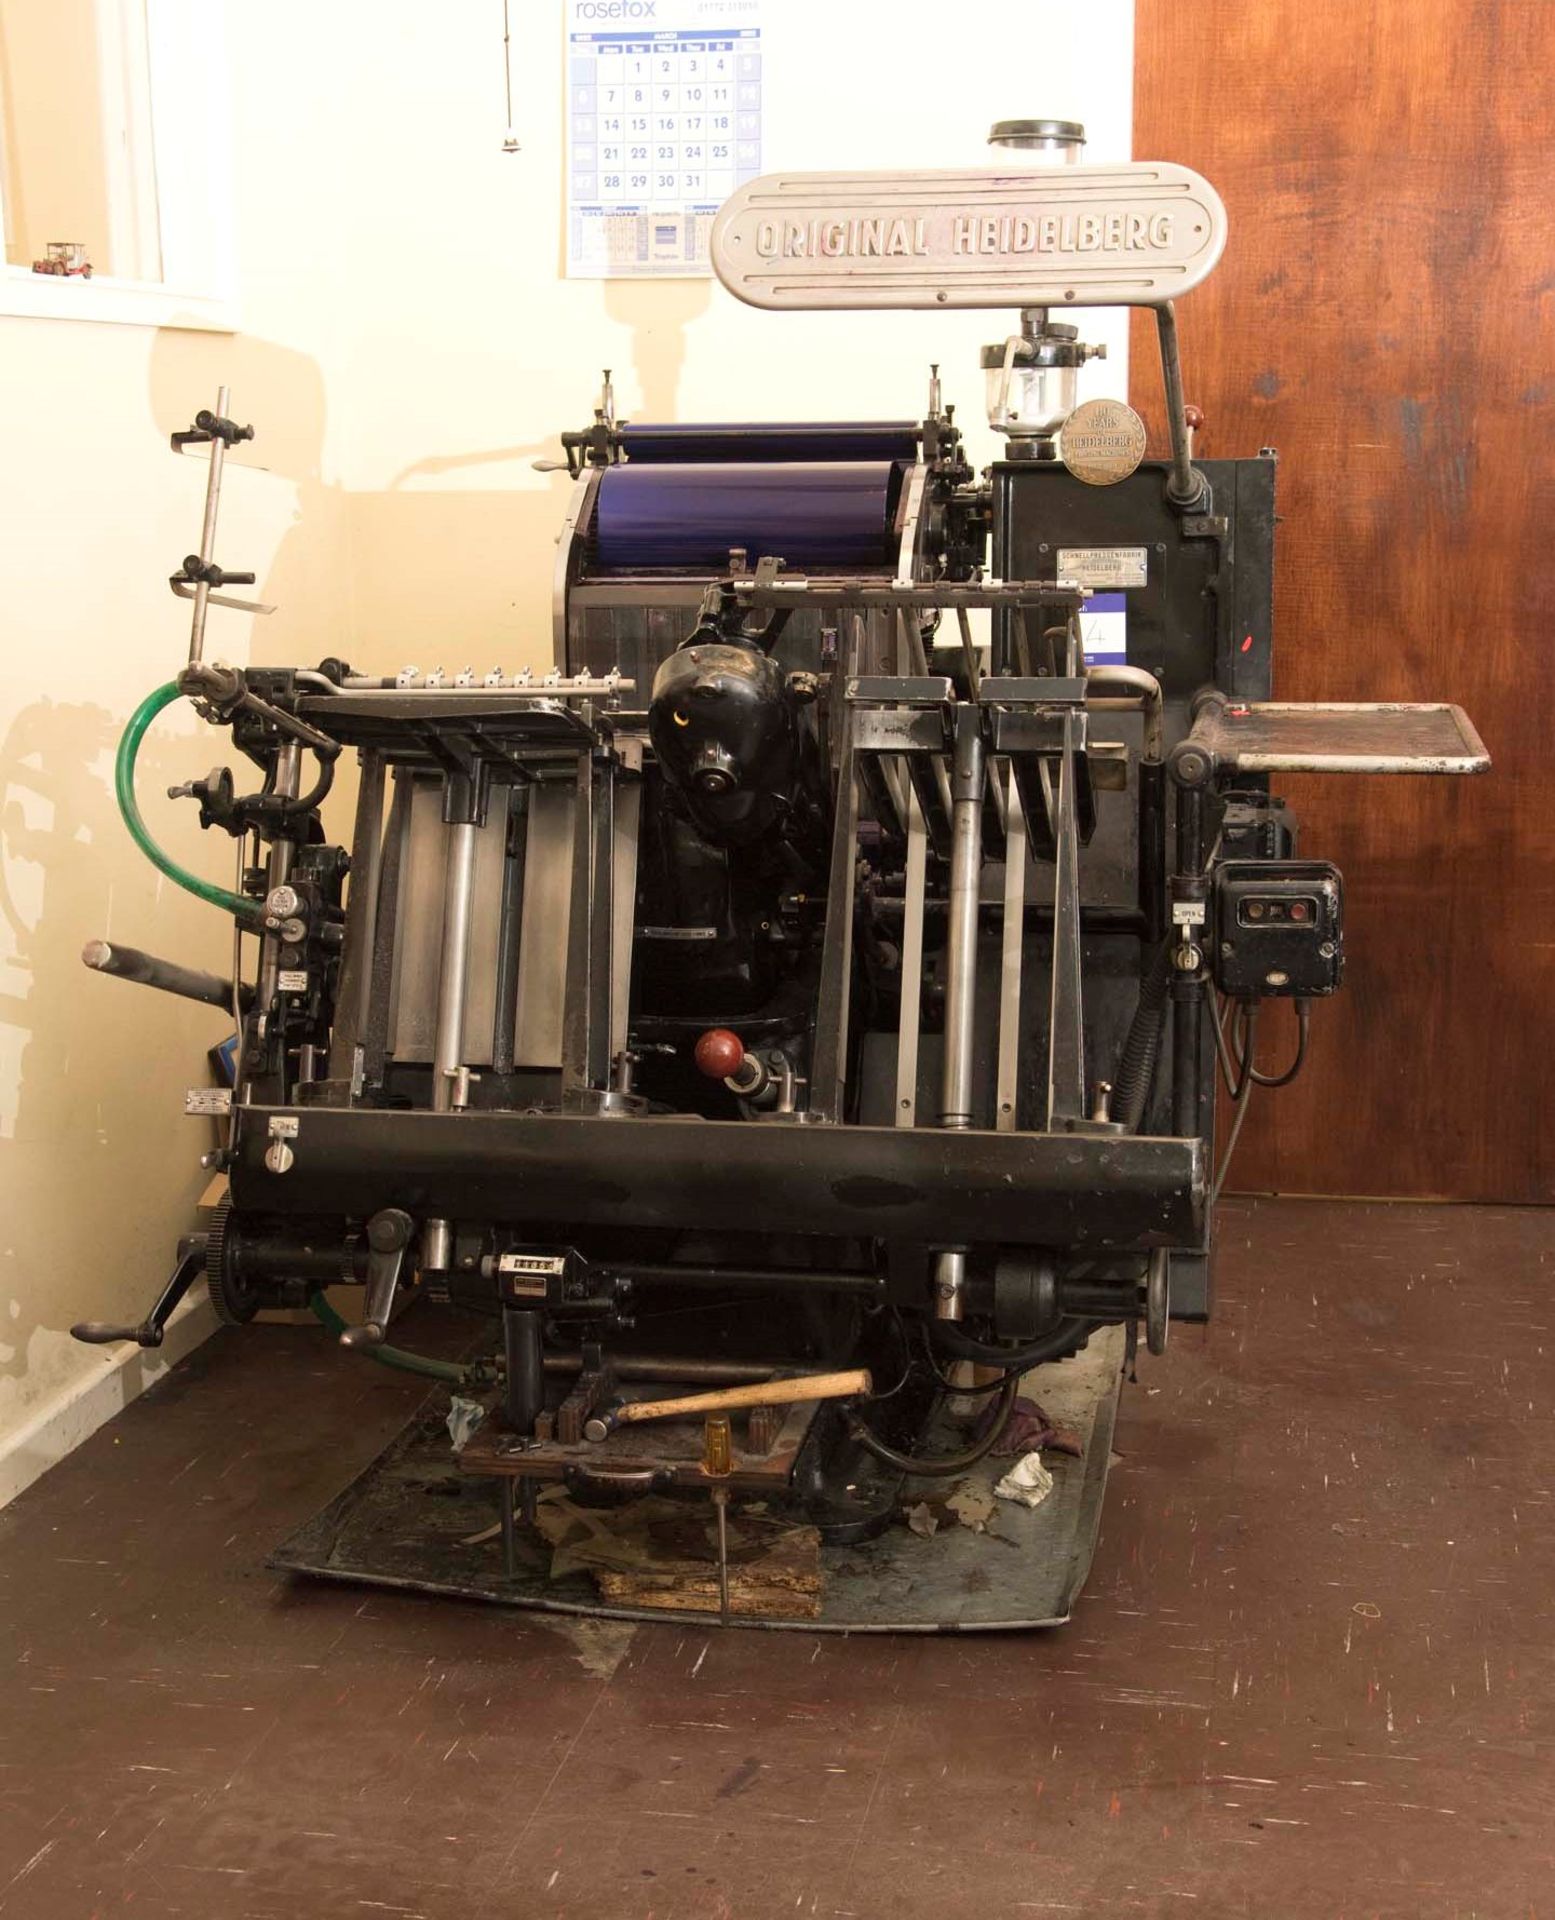 Heidelberg 10x15 platen Serial No. T 129 937 E. With 6 Formes - Image 2 of 4